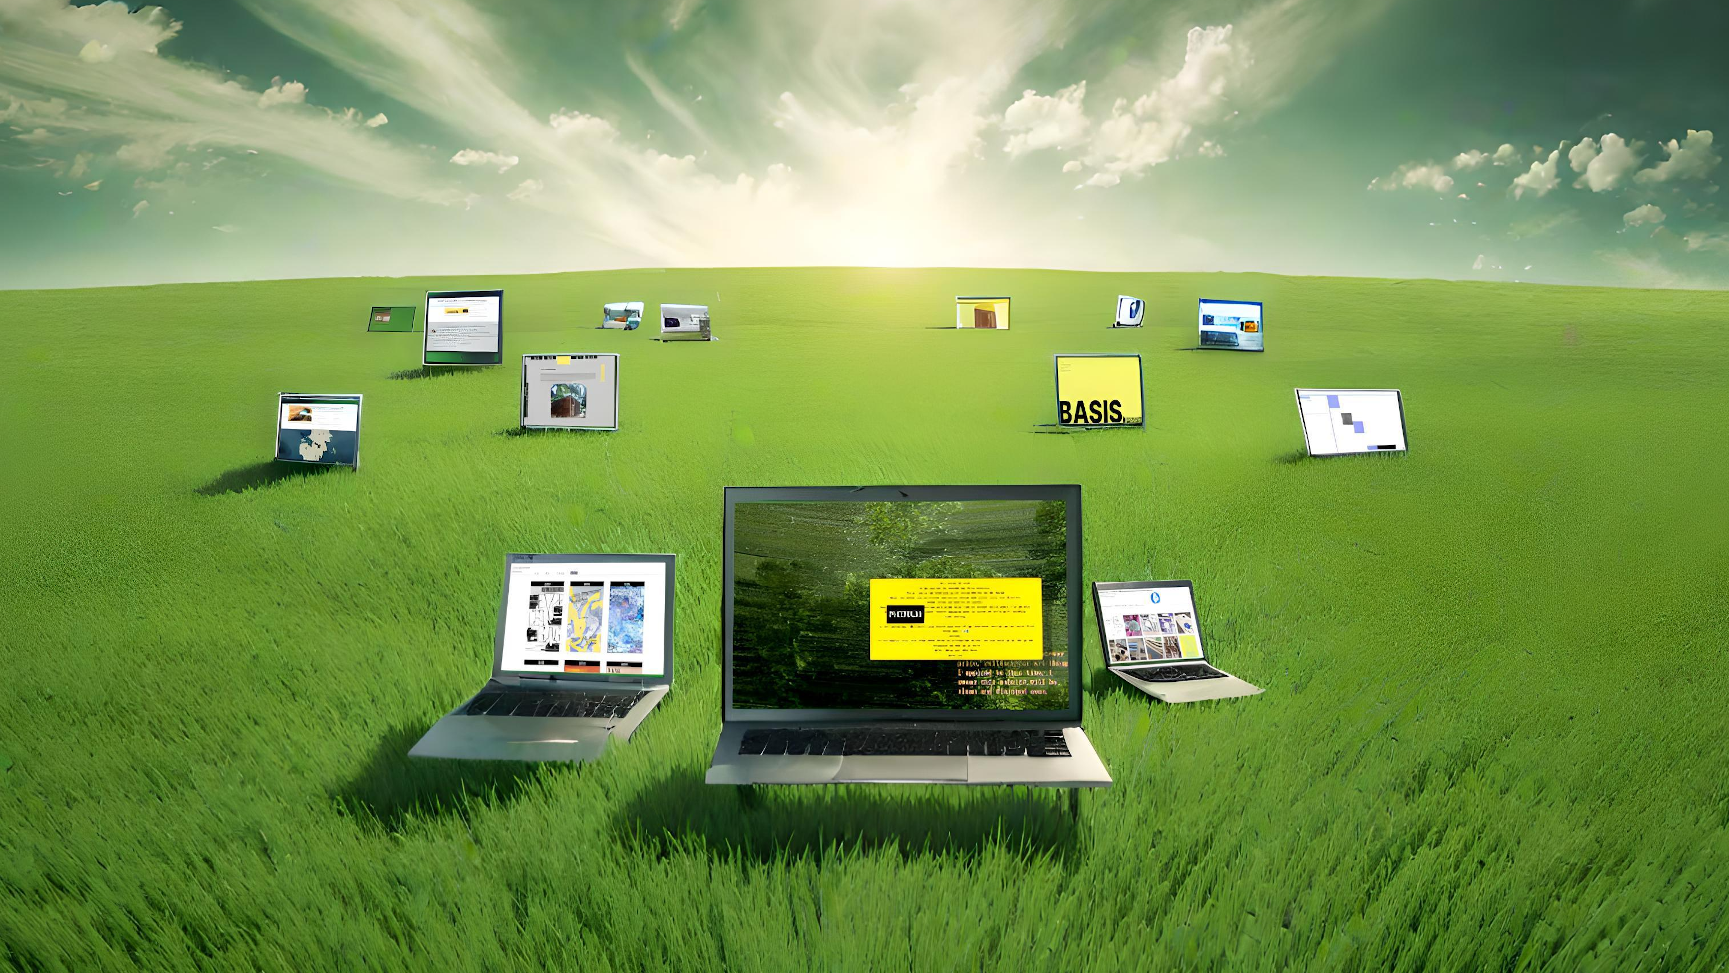 a wide green and open field in which screens depicting websites roam freely, how wonderful